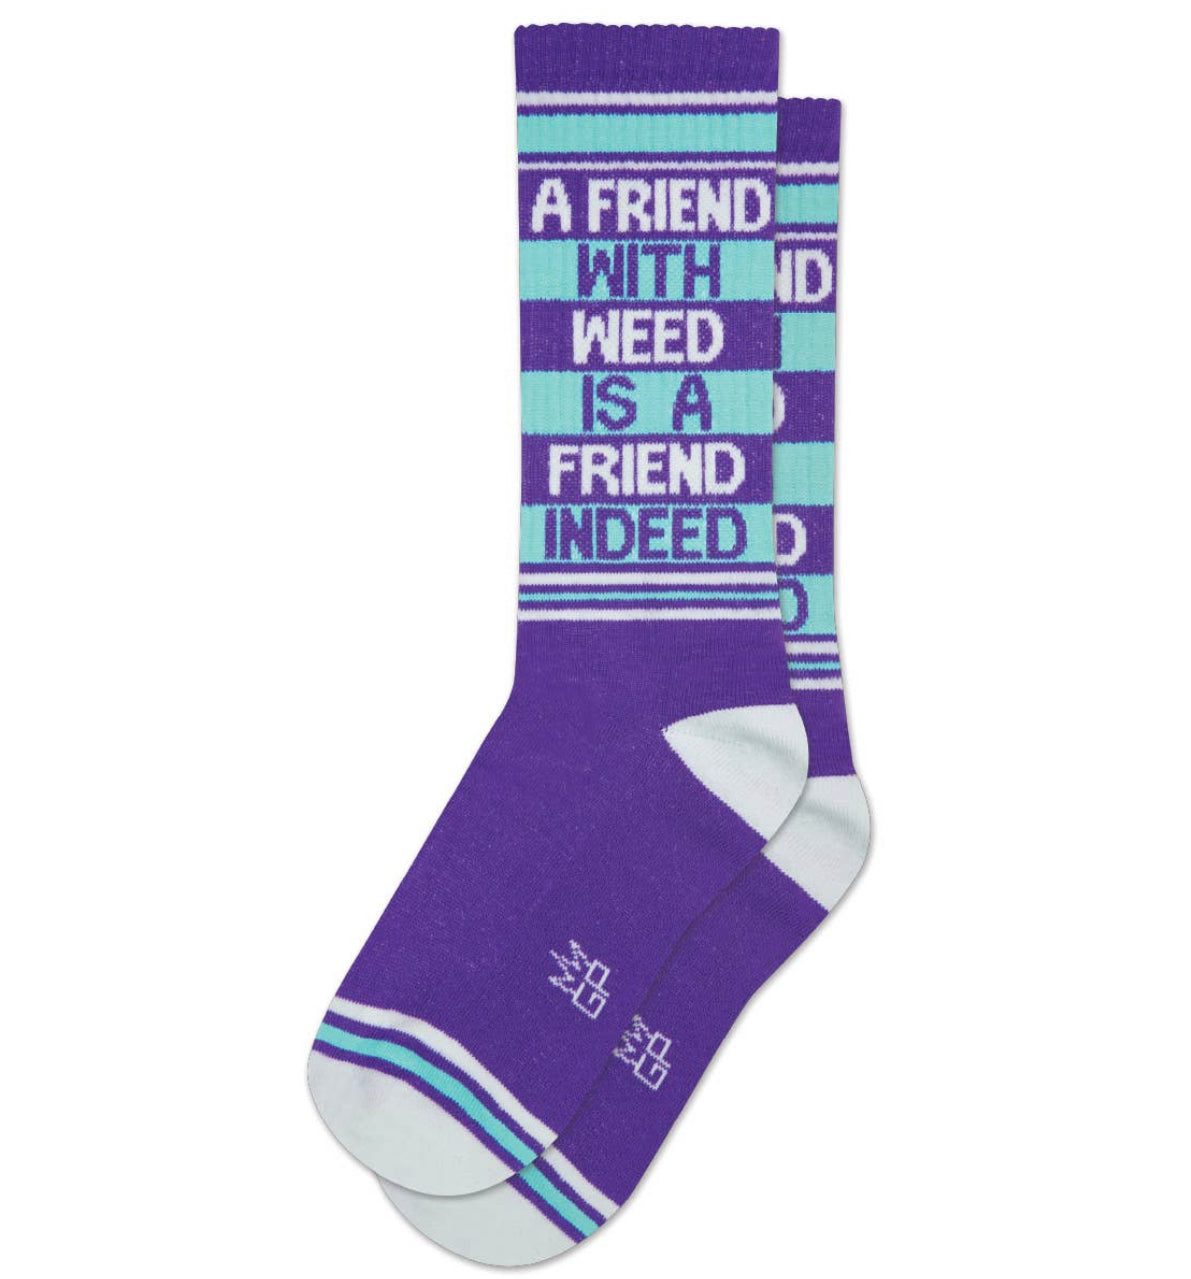 A Friend With Weed Is A Friend Indeed Gym Crew Socks